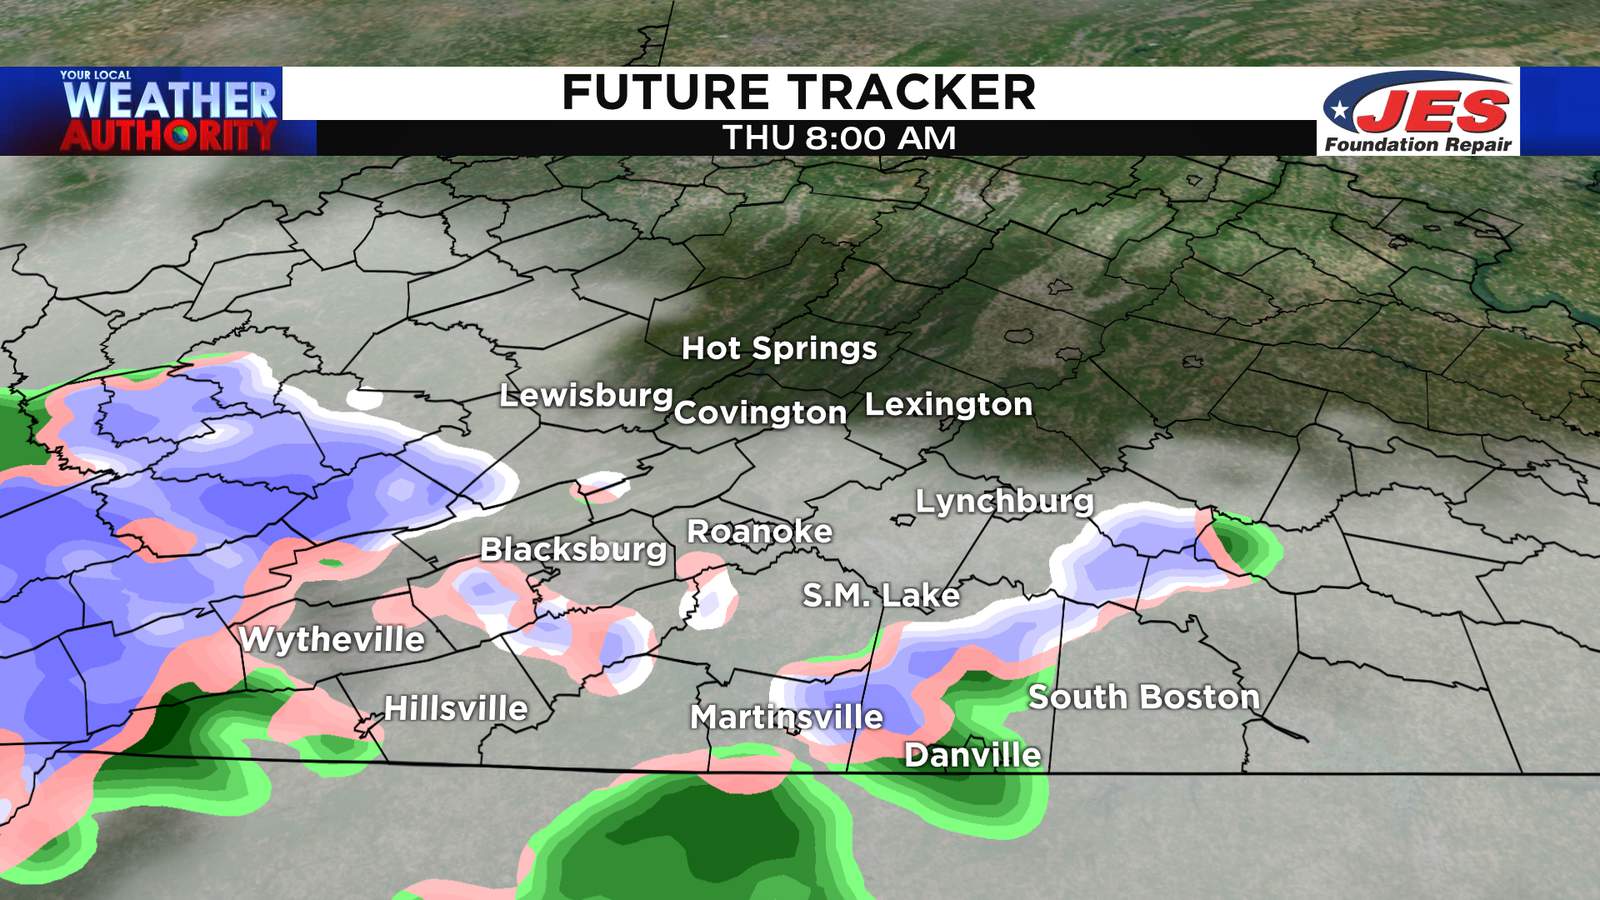 Brief wintry mix for some before improving temperatures Thursday